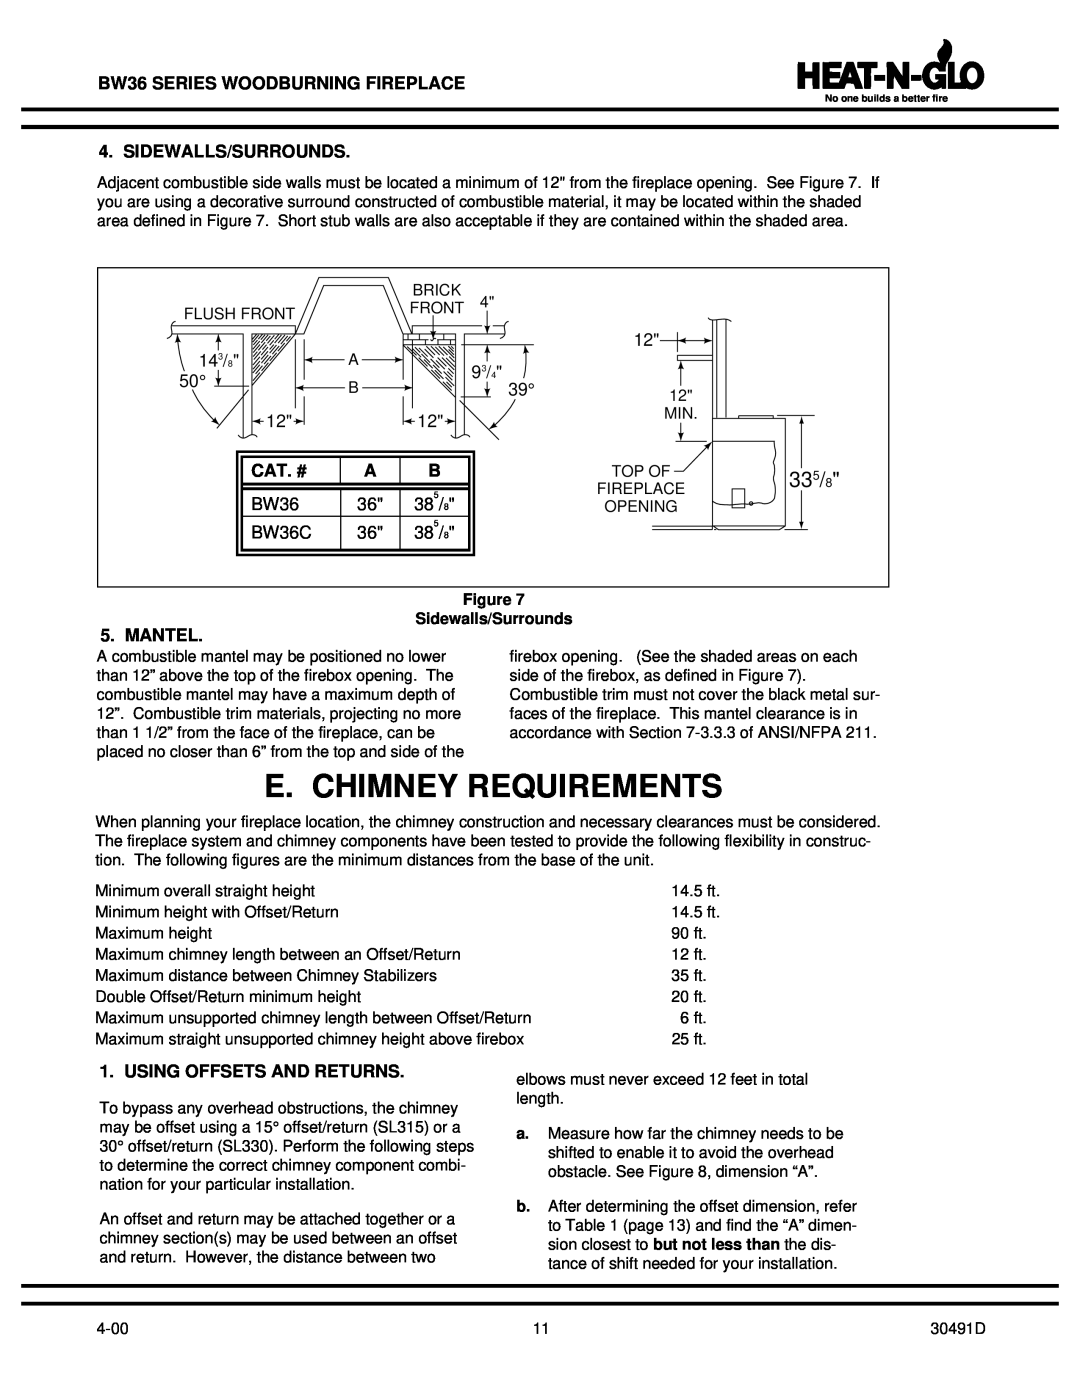 Heat & Glo LifeStyle BW36 E. Chimney Requirements, Sidewalls/Surrounds, Mantel, Using Offsets And Returns, 335/8, Cat. # 